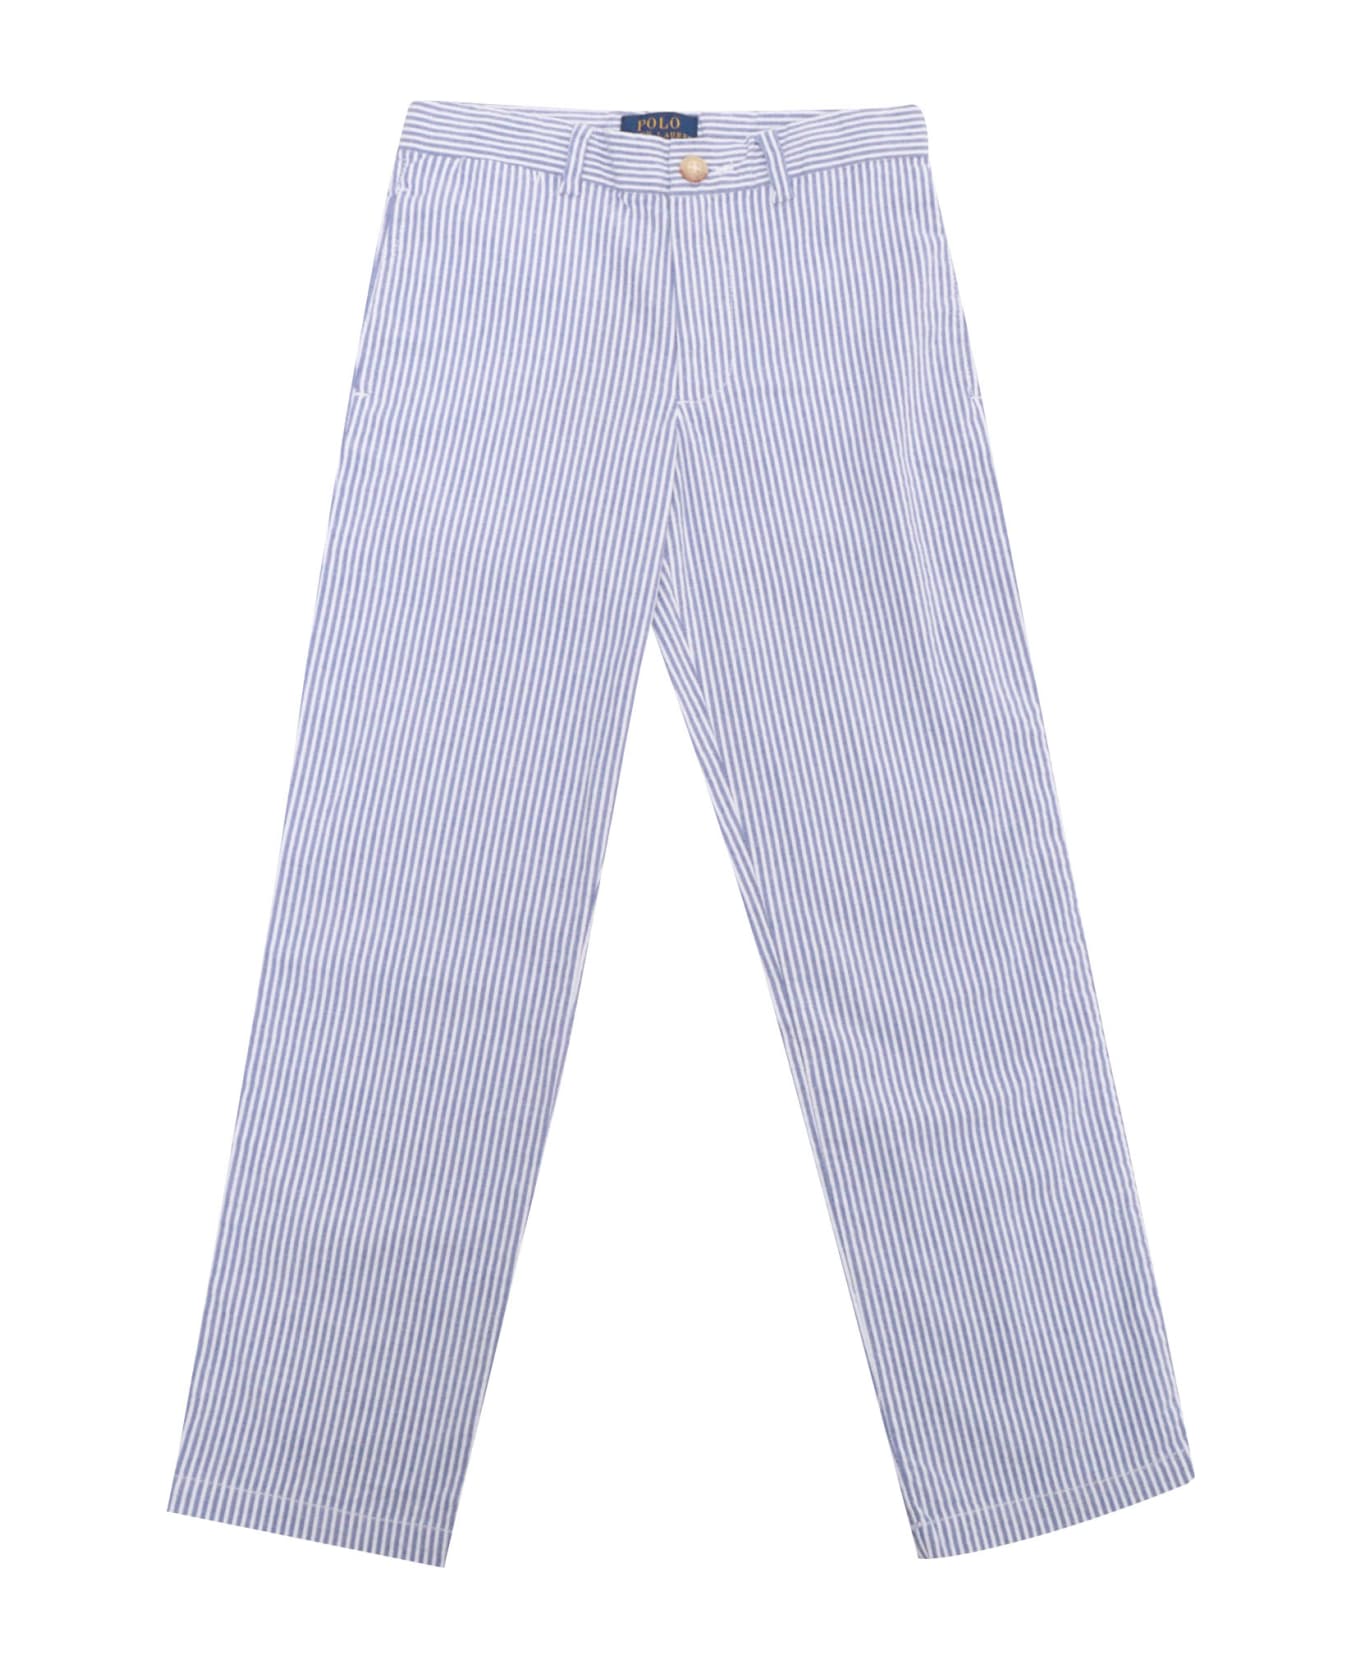 Polo Ralph Lauren Striped Trousers - BLUE ボトムス